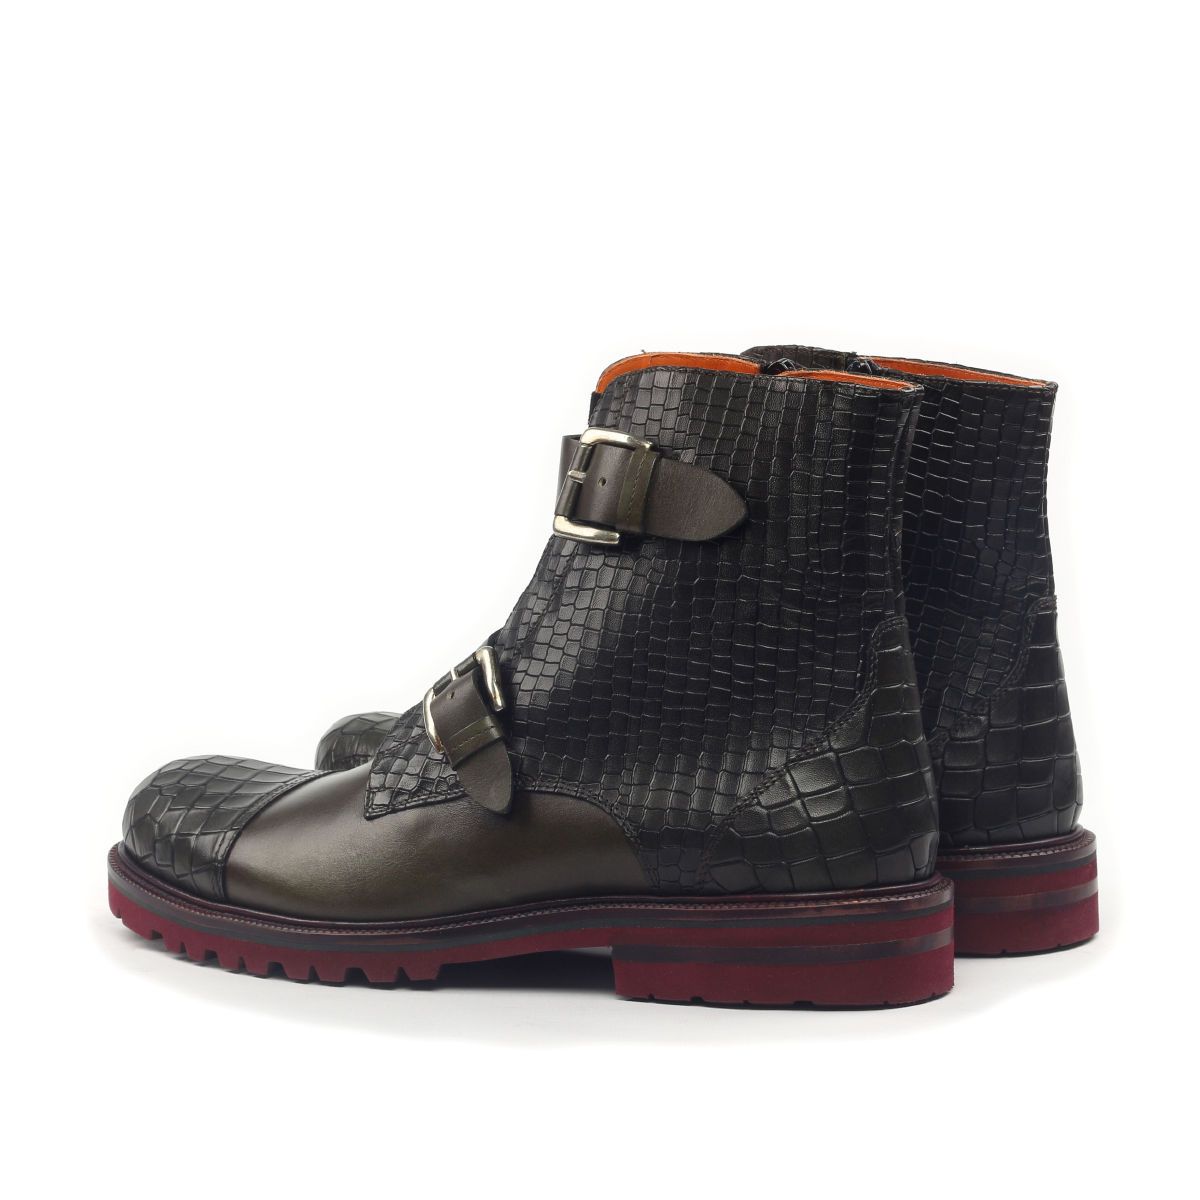 Omine Engraved Cap Toe Double Strap Boot